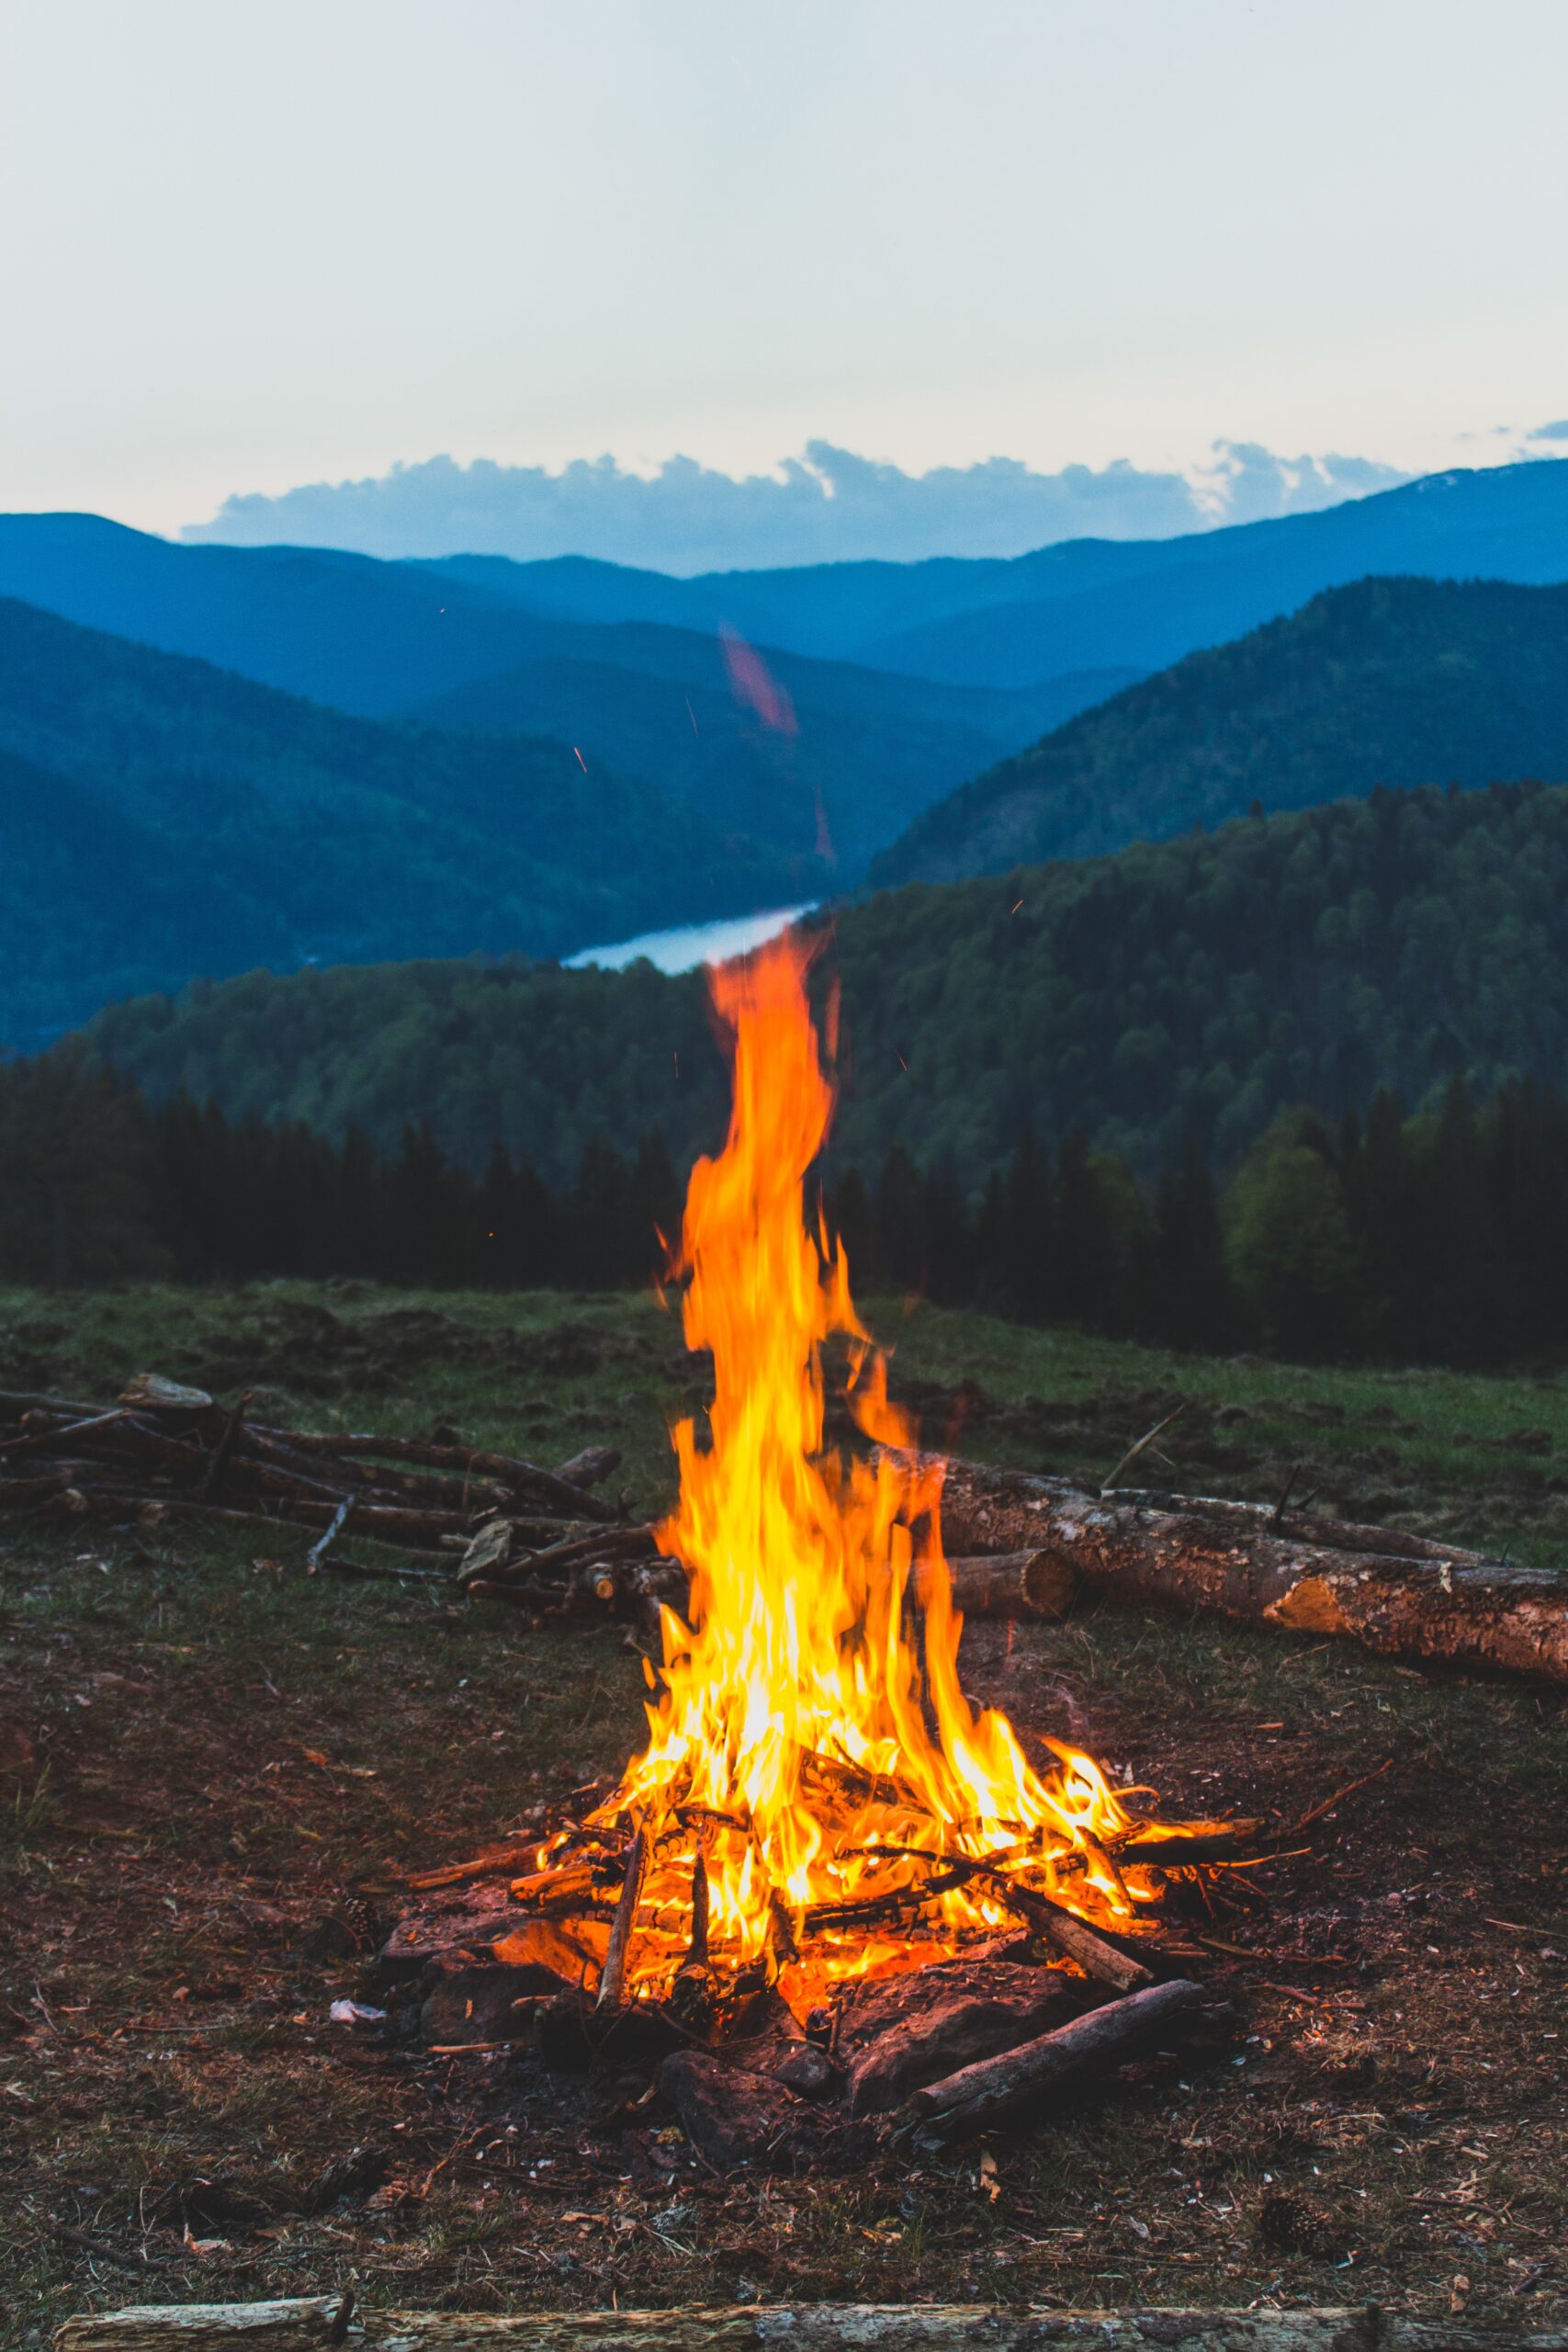 How To Make A Fire Burn Hotter – 6 Top Tips